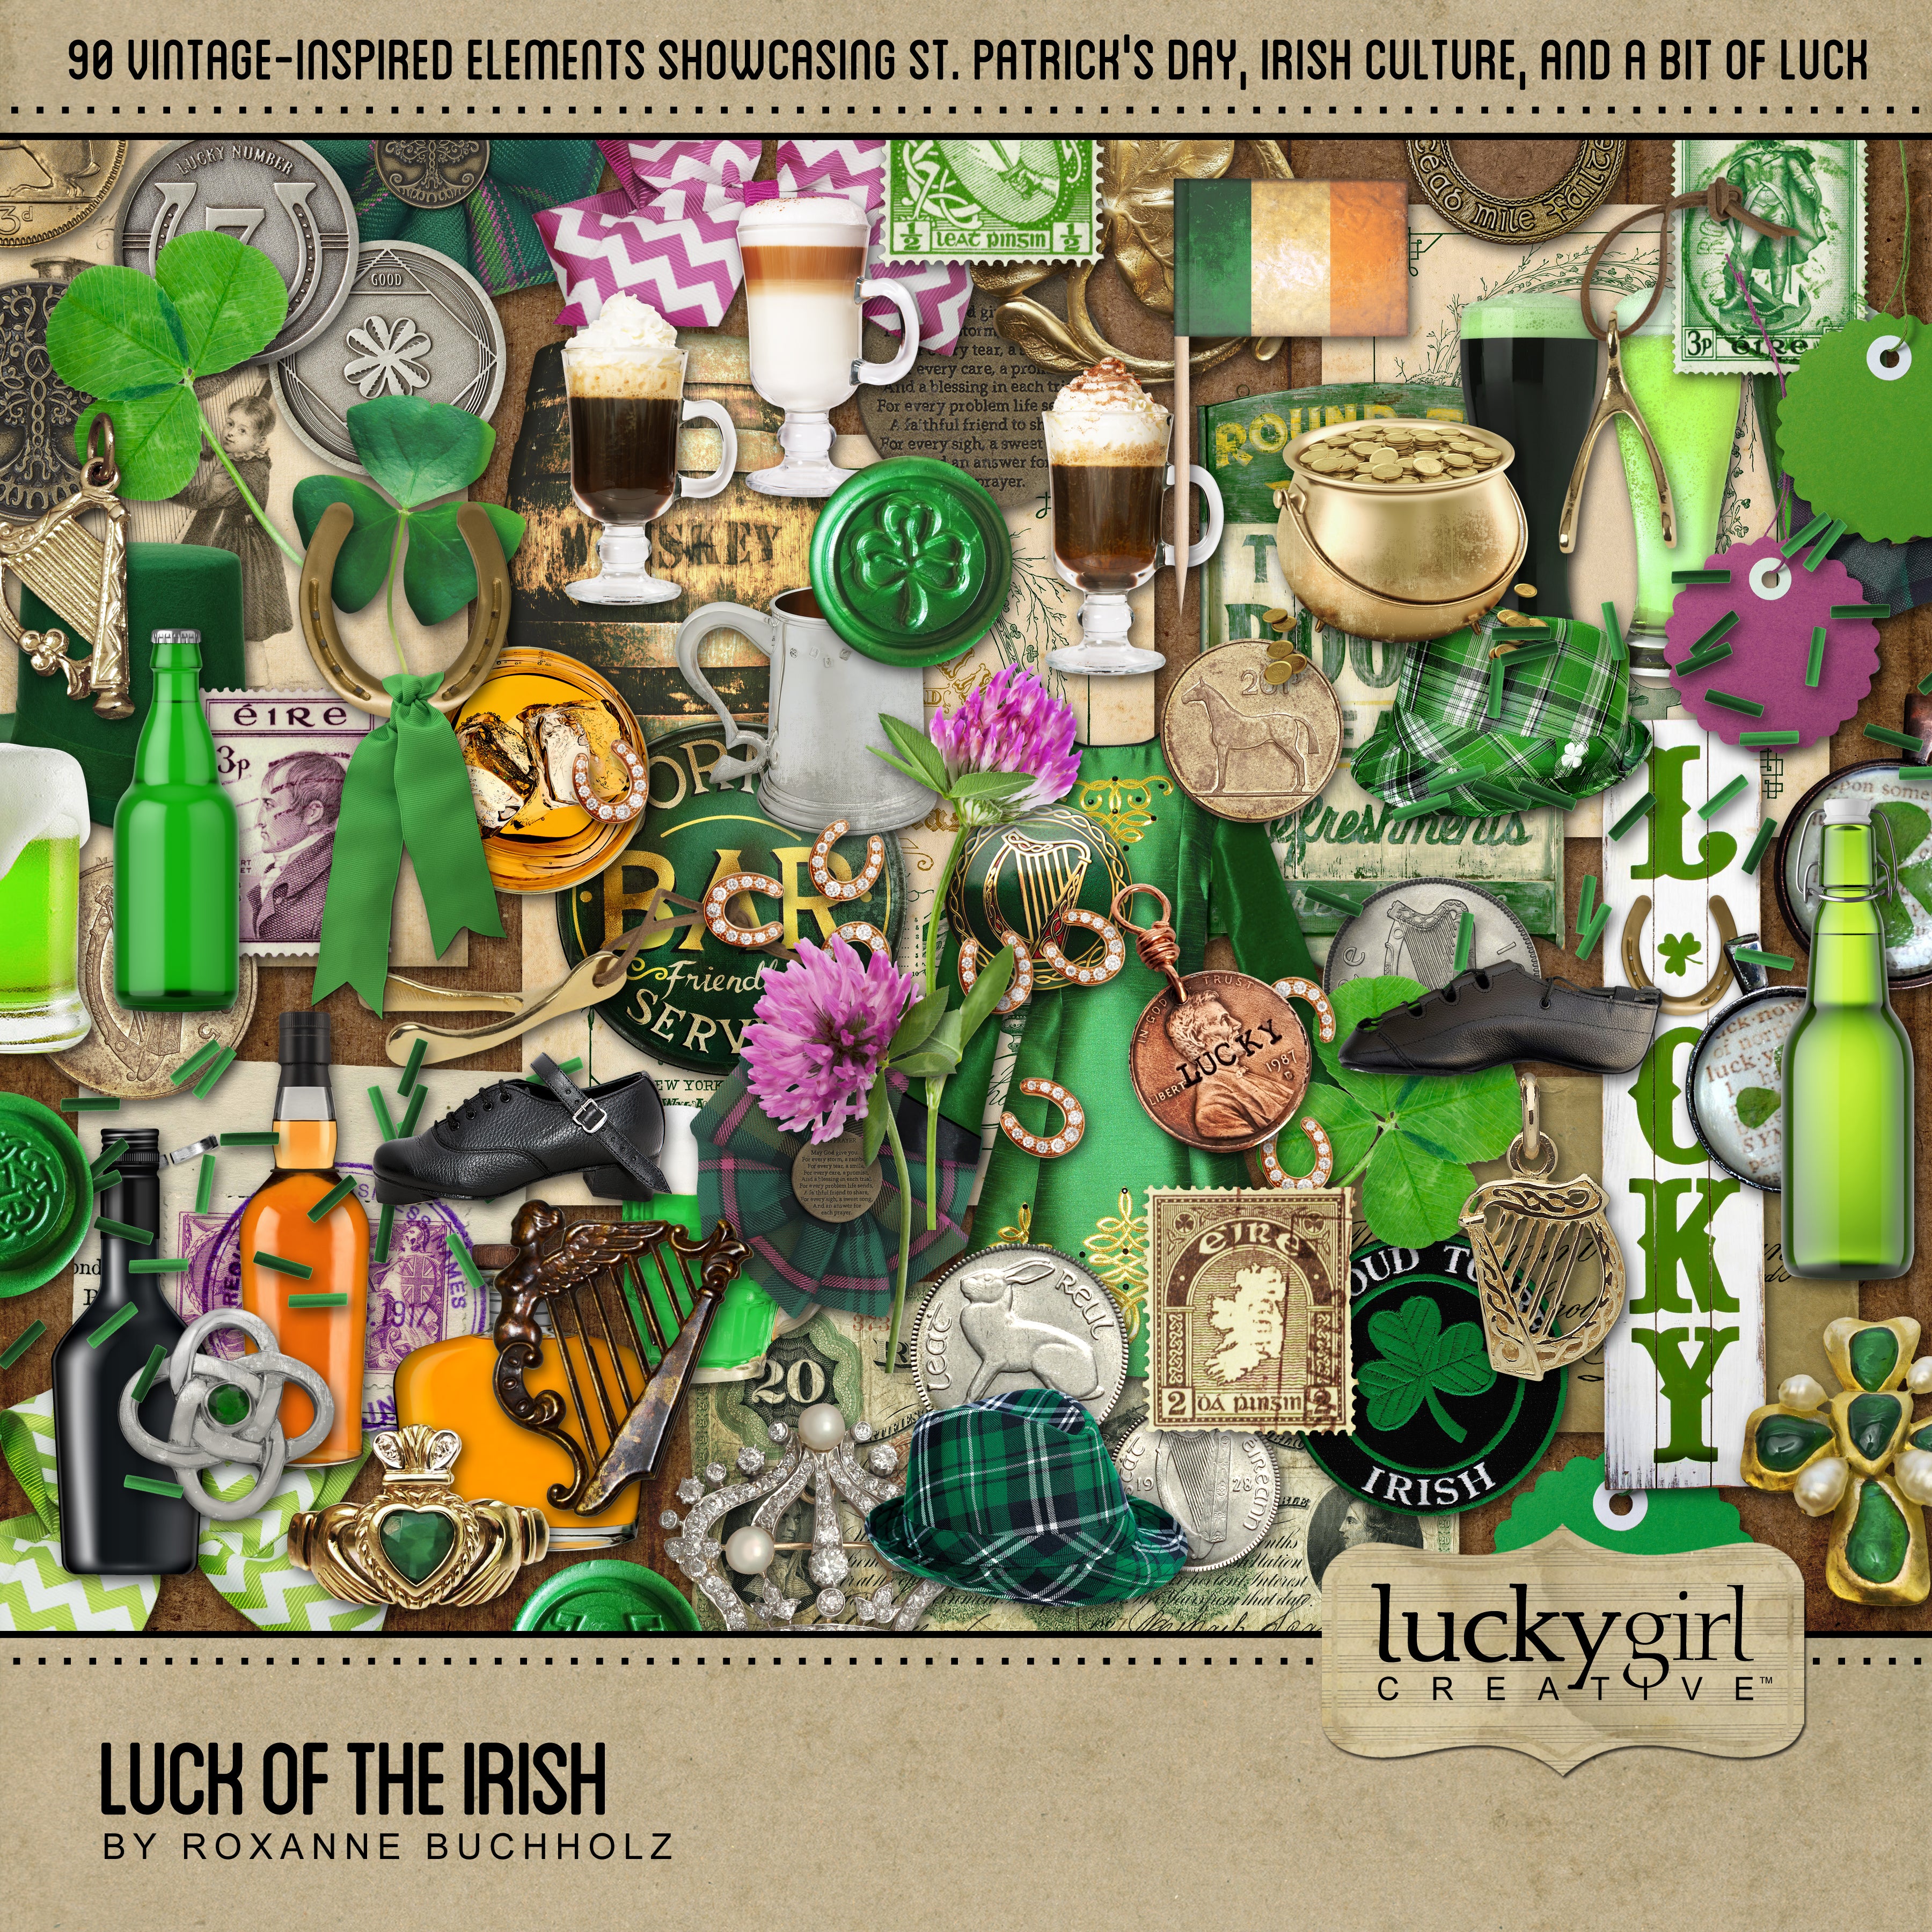 This is your lucky day! Filled with digital art elements of luck and vintage Irish memorabilia, this collection will help you document your St. Patrick's Day celebrations, Irish family history projects, and vacations to Ireland.